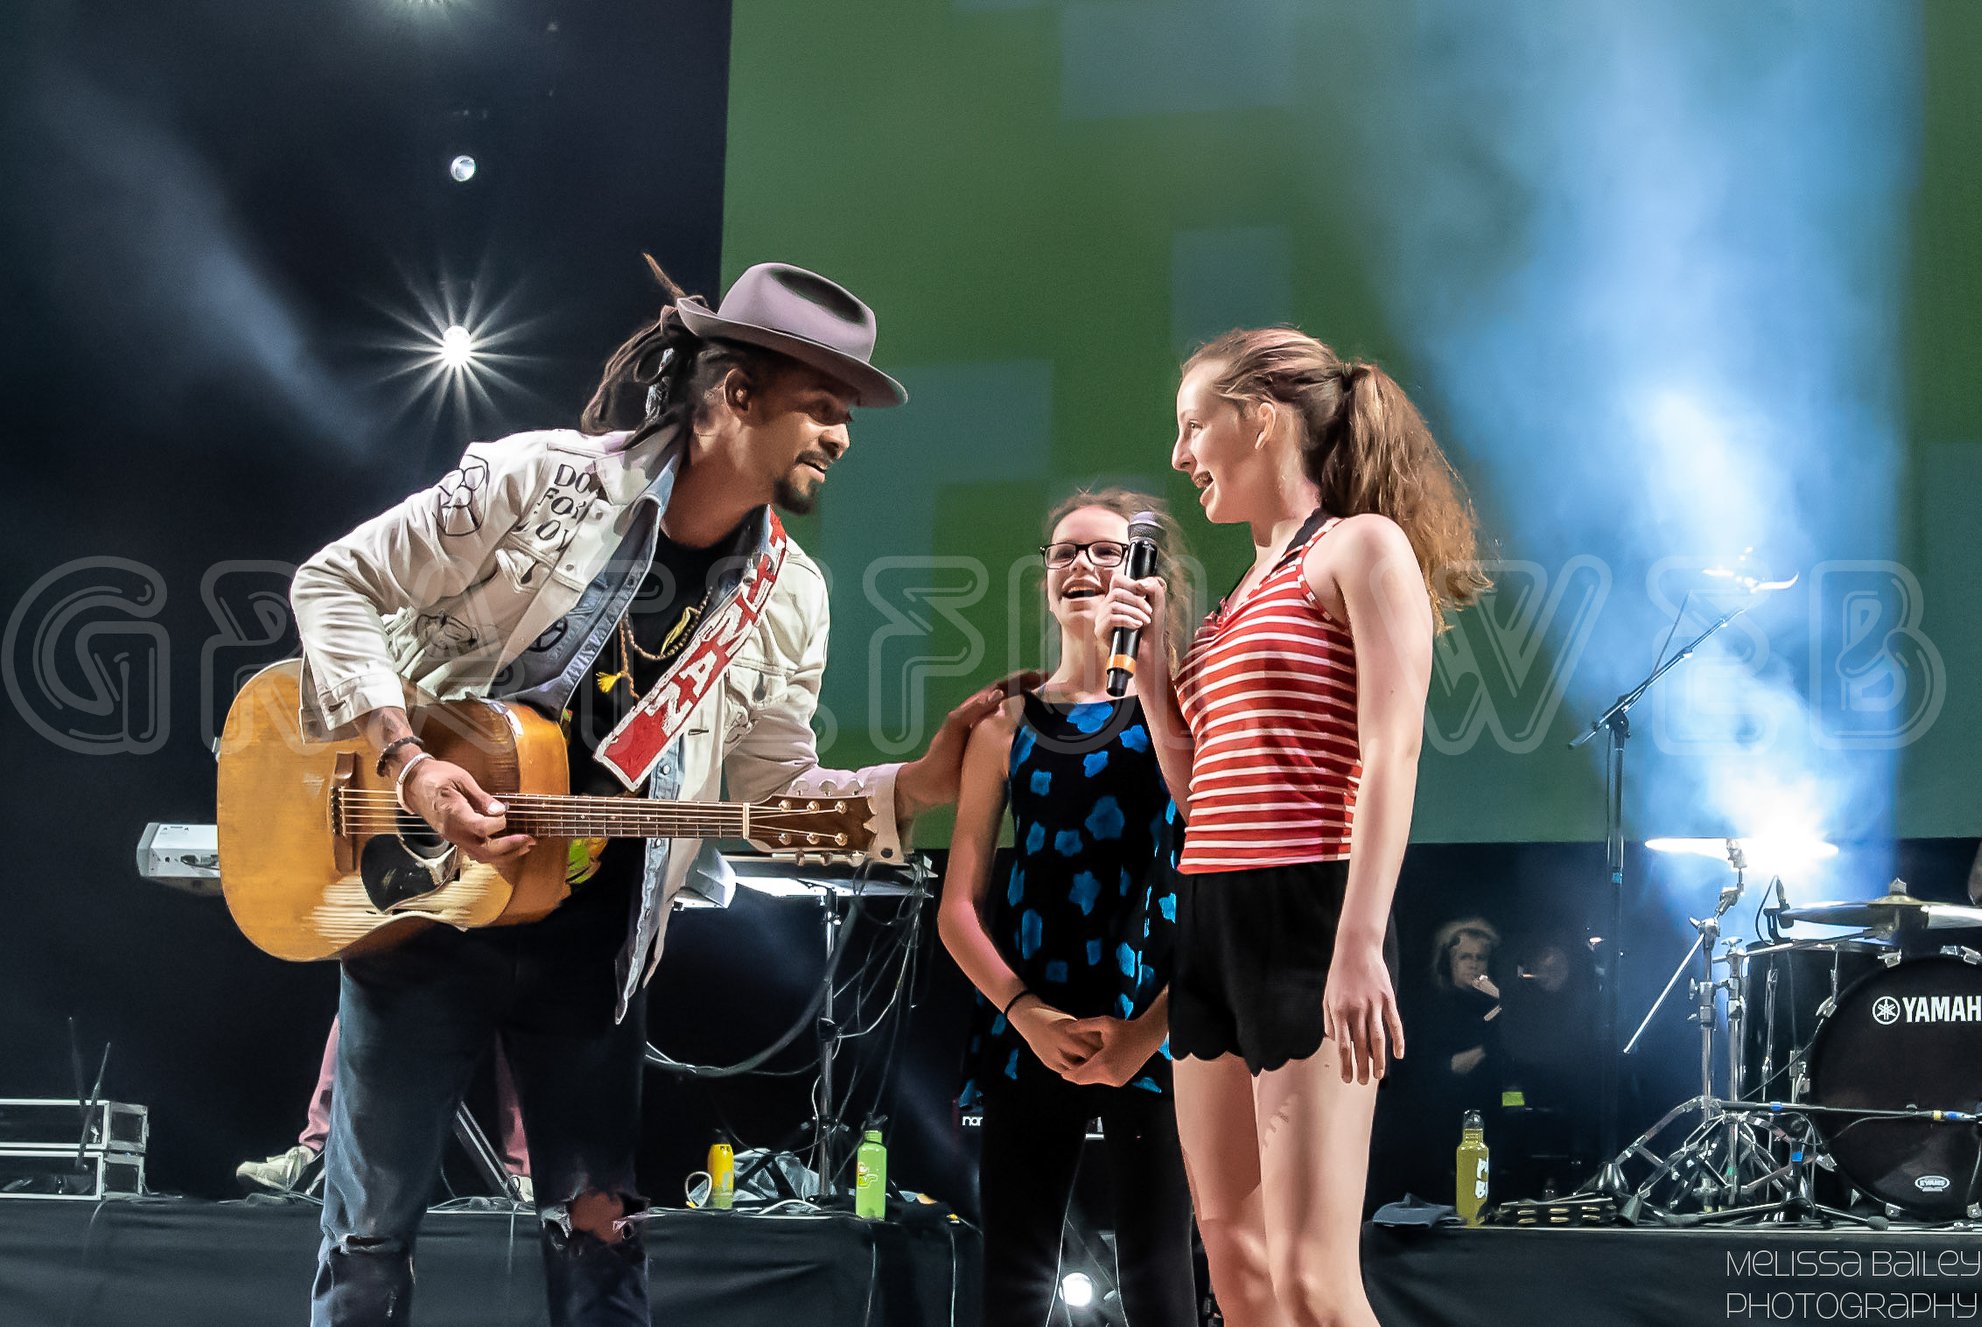 Michael Franti introduces some wonderful young singers to the stage